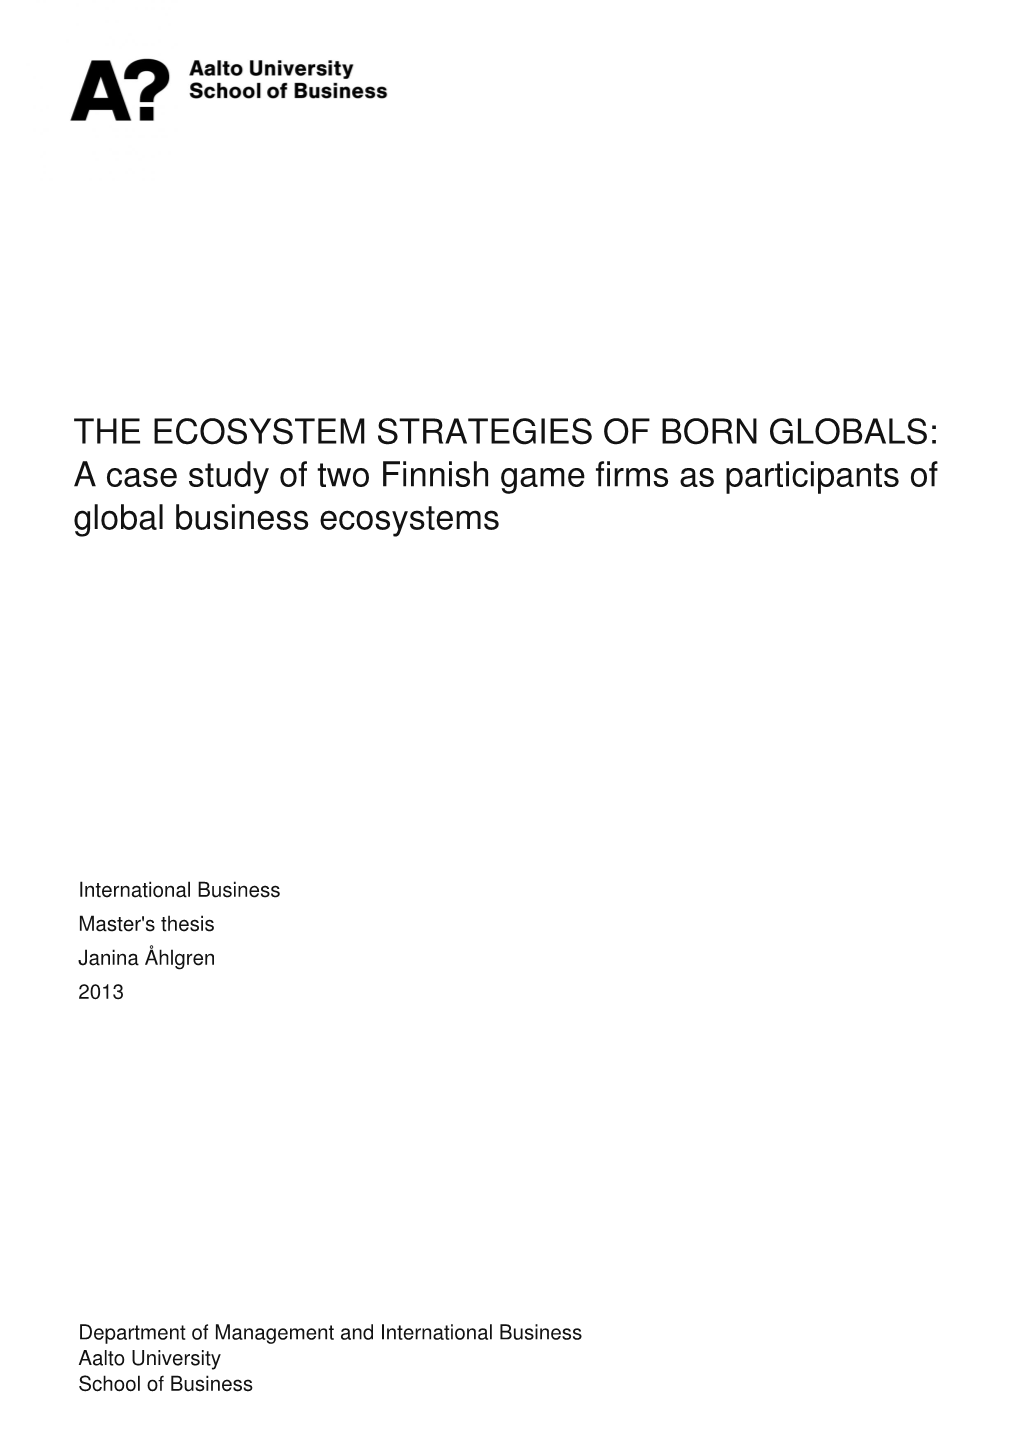 THE ECOSYSTEM STRATEGIES of BORN GLOBALS: a Case Study of Two Finnish Game Firms As Participants of Global Business Ecosystems